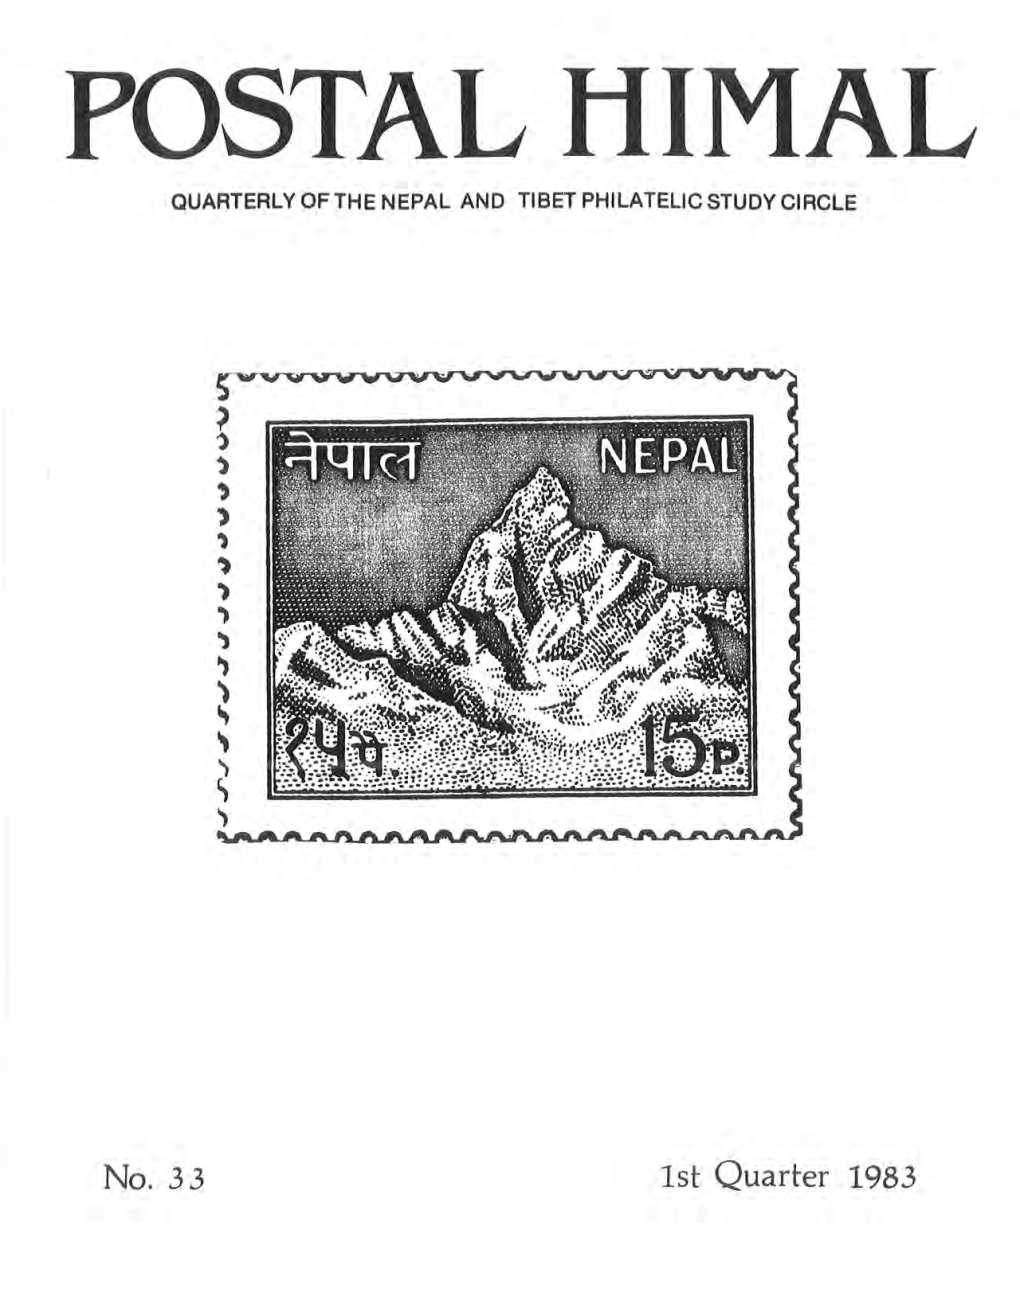 No. 33 1St Quarter 1983 the NEPAL POSTAL HIMAL Is the Quarterly Publication of the Nepal and Tibet Philatelic Study Circle